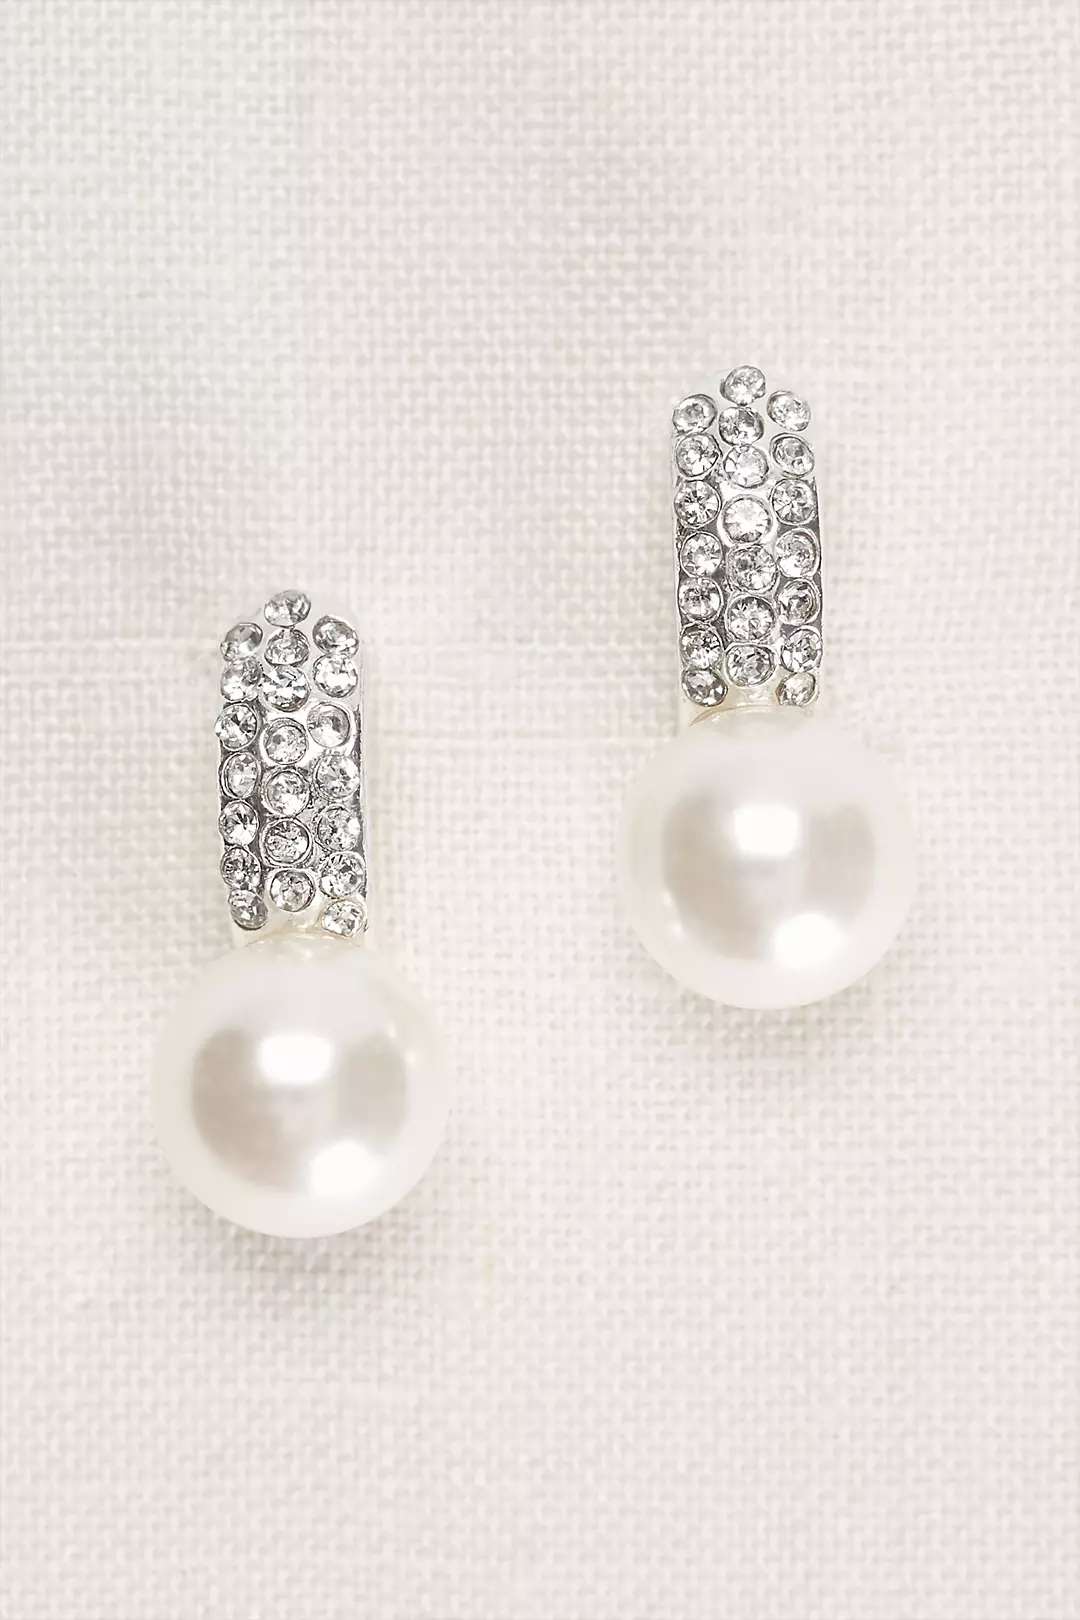 Pearl and Pave Crystal Earrings Image